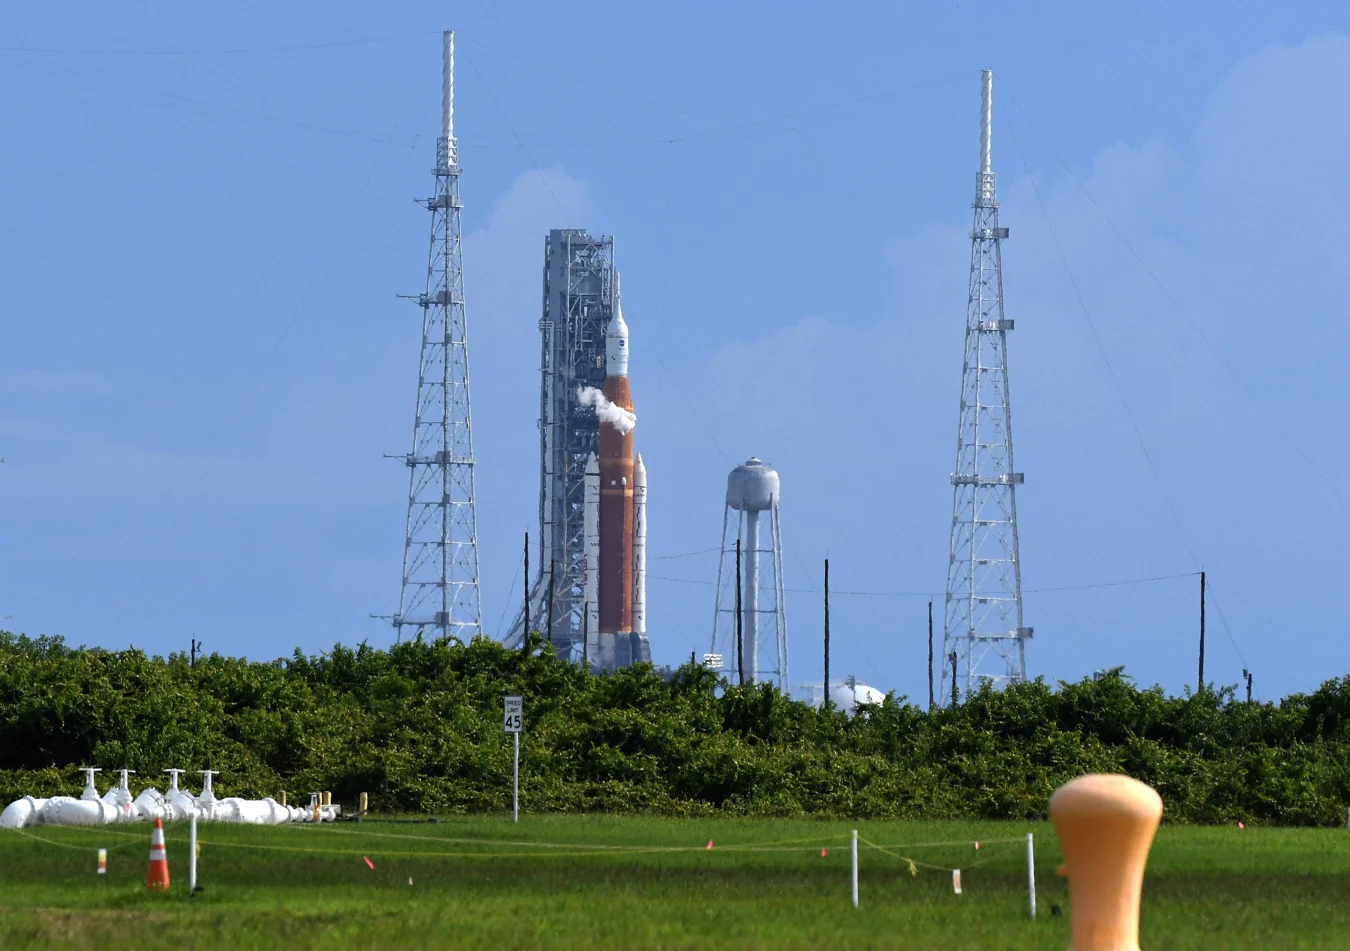 CAPE CANAVERAL, FLORIDA, UNITED STATES - SEPTEMBER 3: NASAâs Artemis 1 moon rocket sits on pad 39-B at the Kennedy Space Center on September 3, 2022, in Cape Canaveral, Florida. The launch was scrubbed on August 29 due to an engine issue, and again today for a fuel leak issue. (Photo by Paul Hennessy/Anadolu Agency via Getty Images)